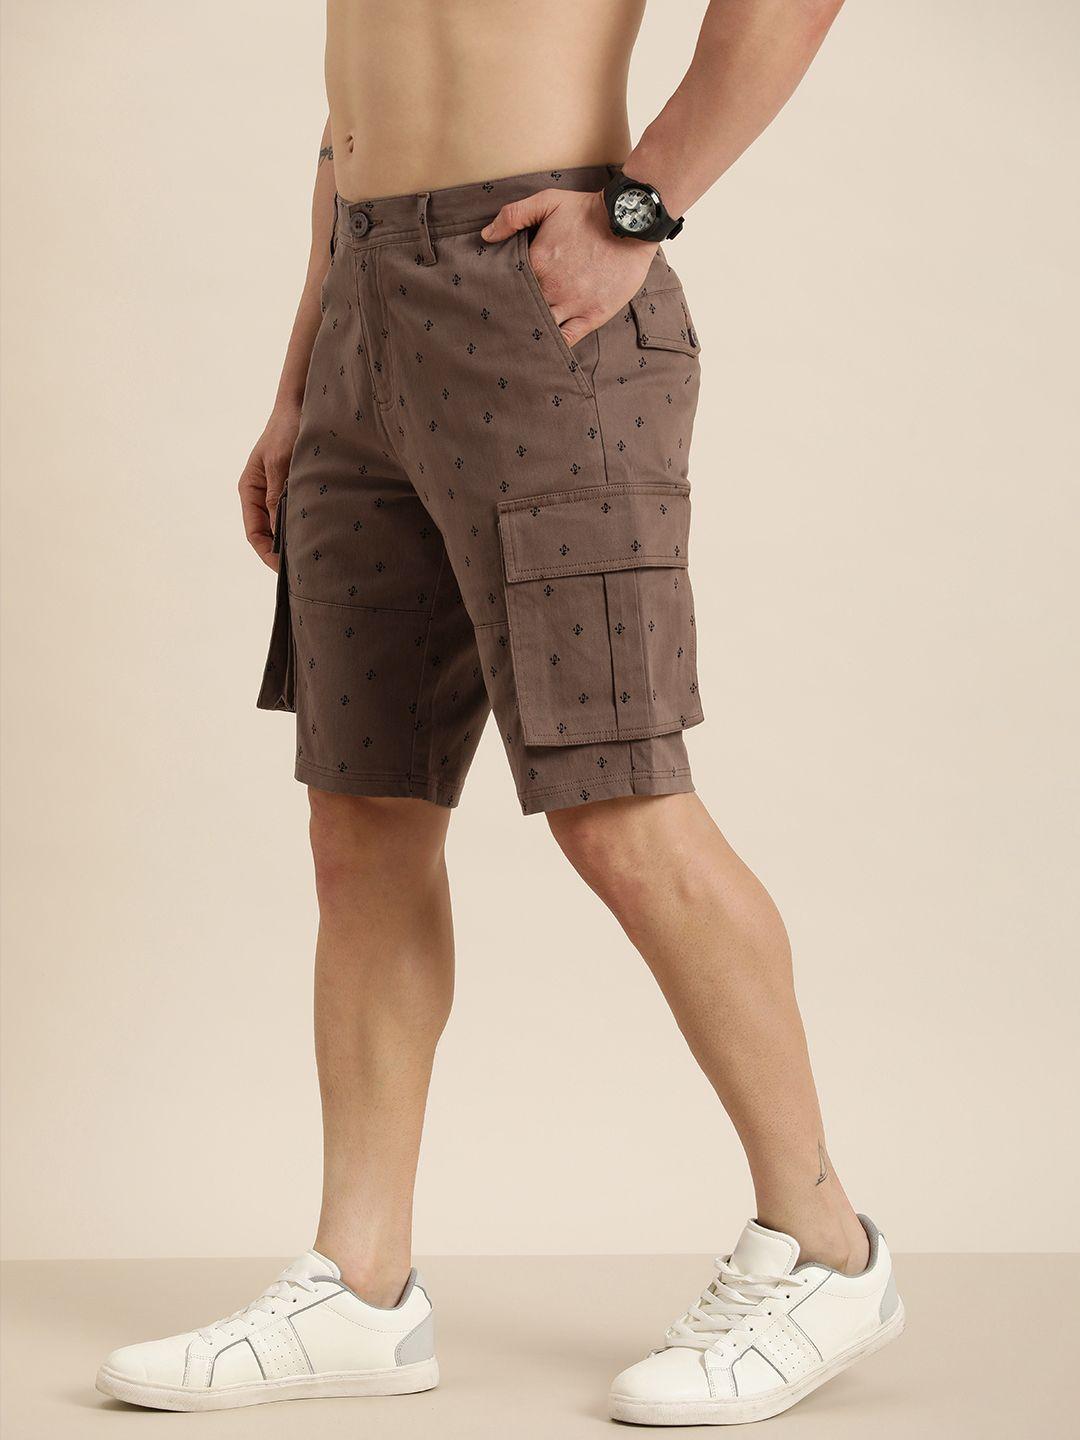 here&now men abstract printed slim fit cargo shorts